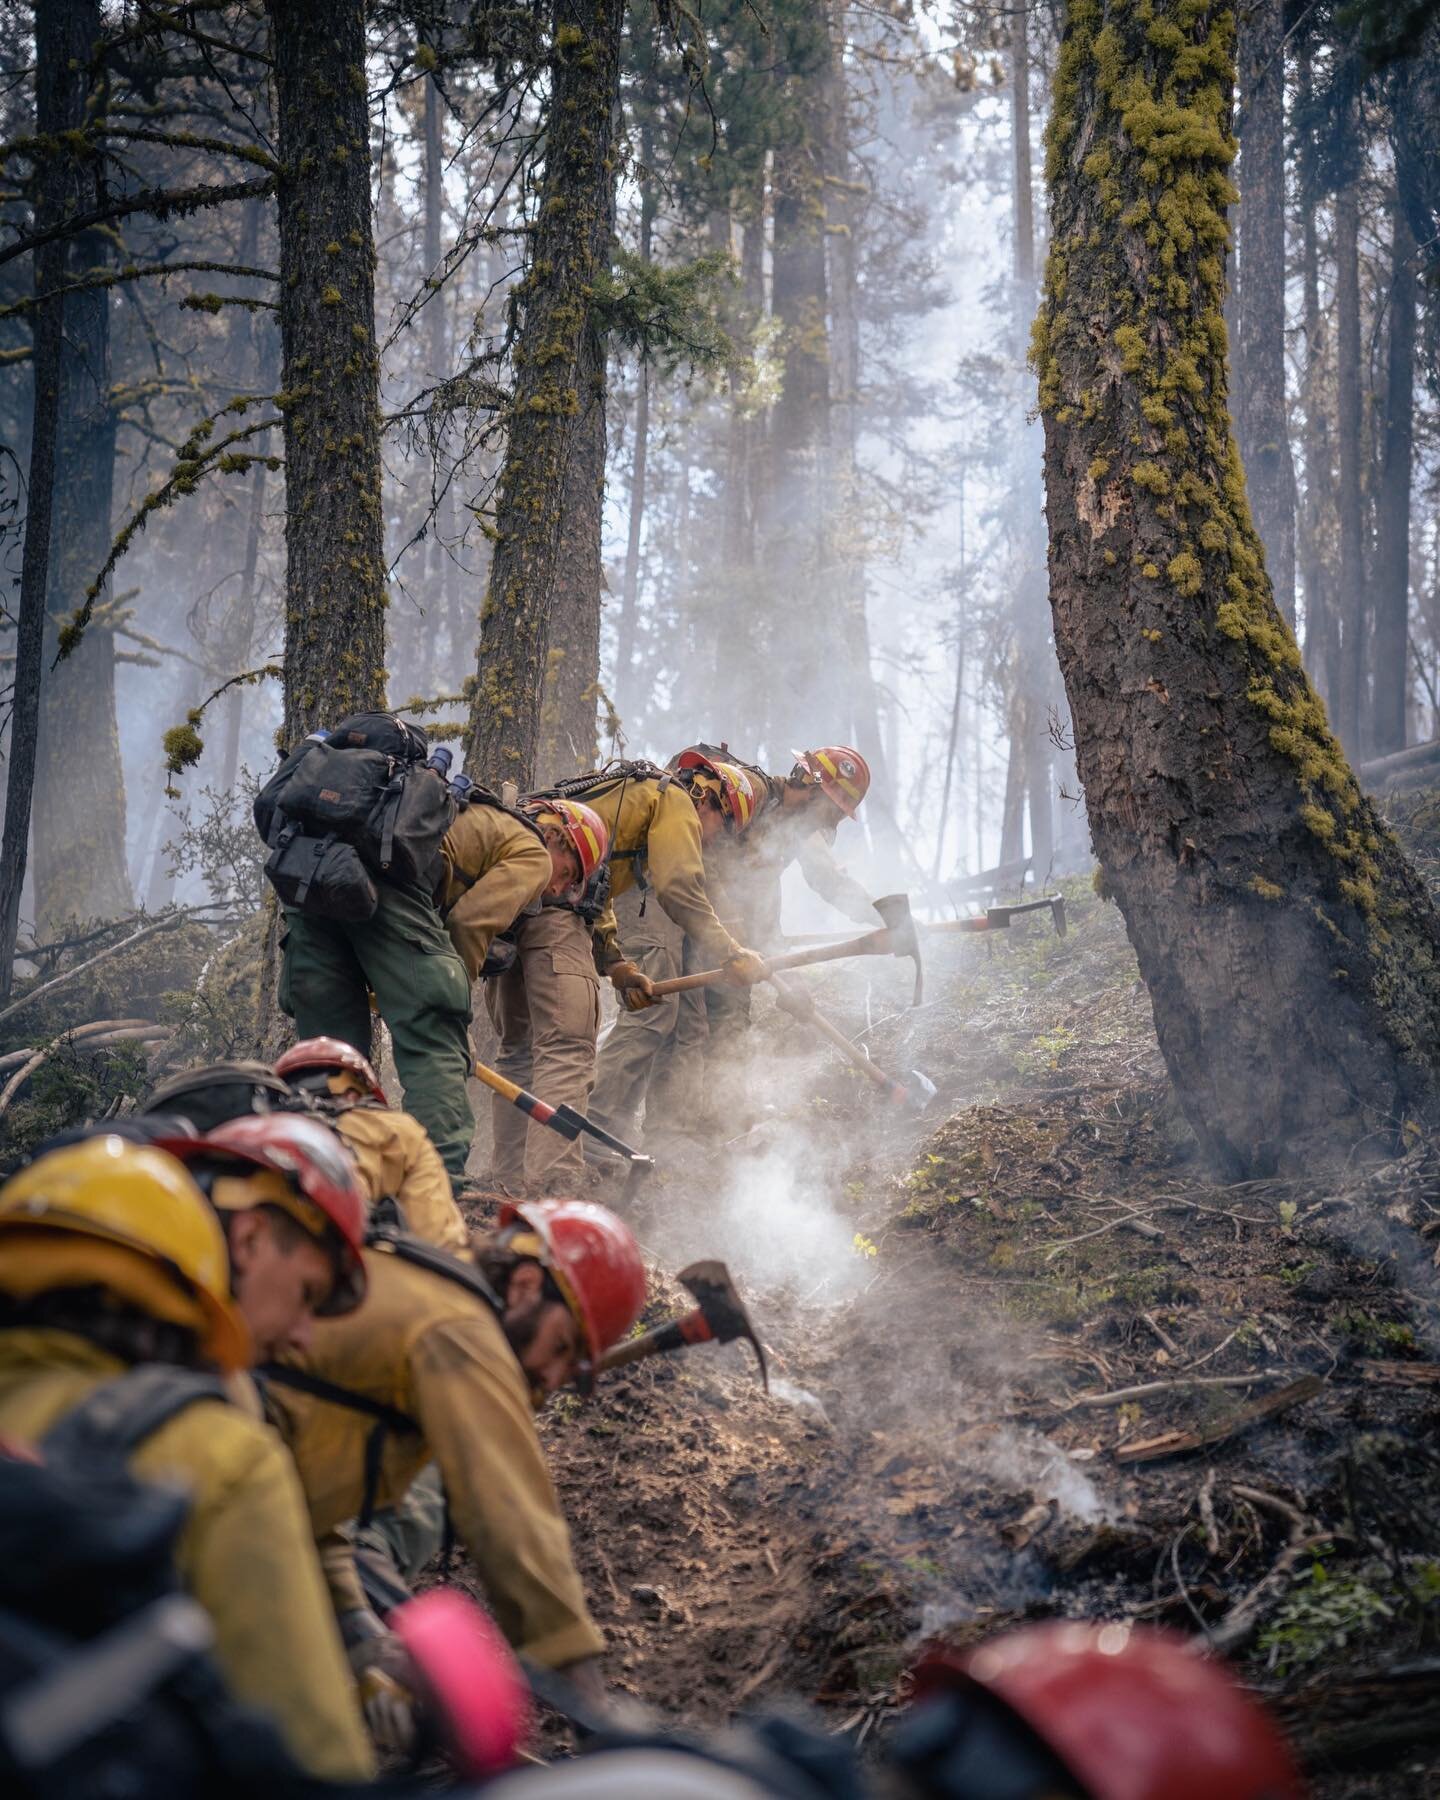 We are thankful for these faces in fire! Photos on the #ElkLakeFire in the SE corner of #Montana by Joe Bradshaw, BLM contract photographer.

#WeAreBLMFire #FirefightingResources #PublicLands #FireJob #NotYourOrdinaryJob #Wildfire #FireYear2022 #Fire